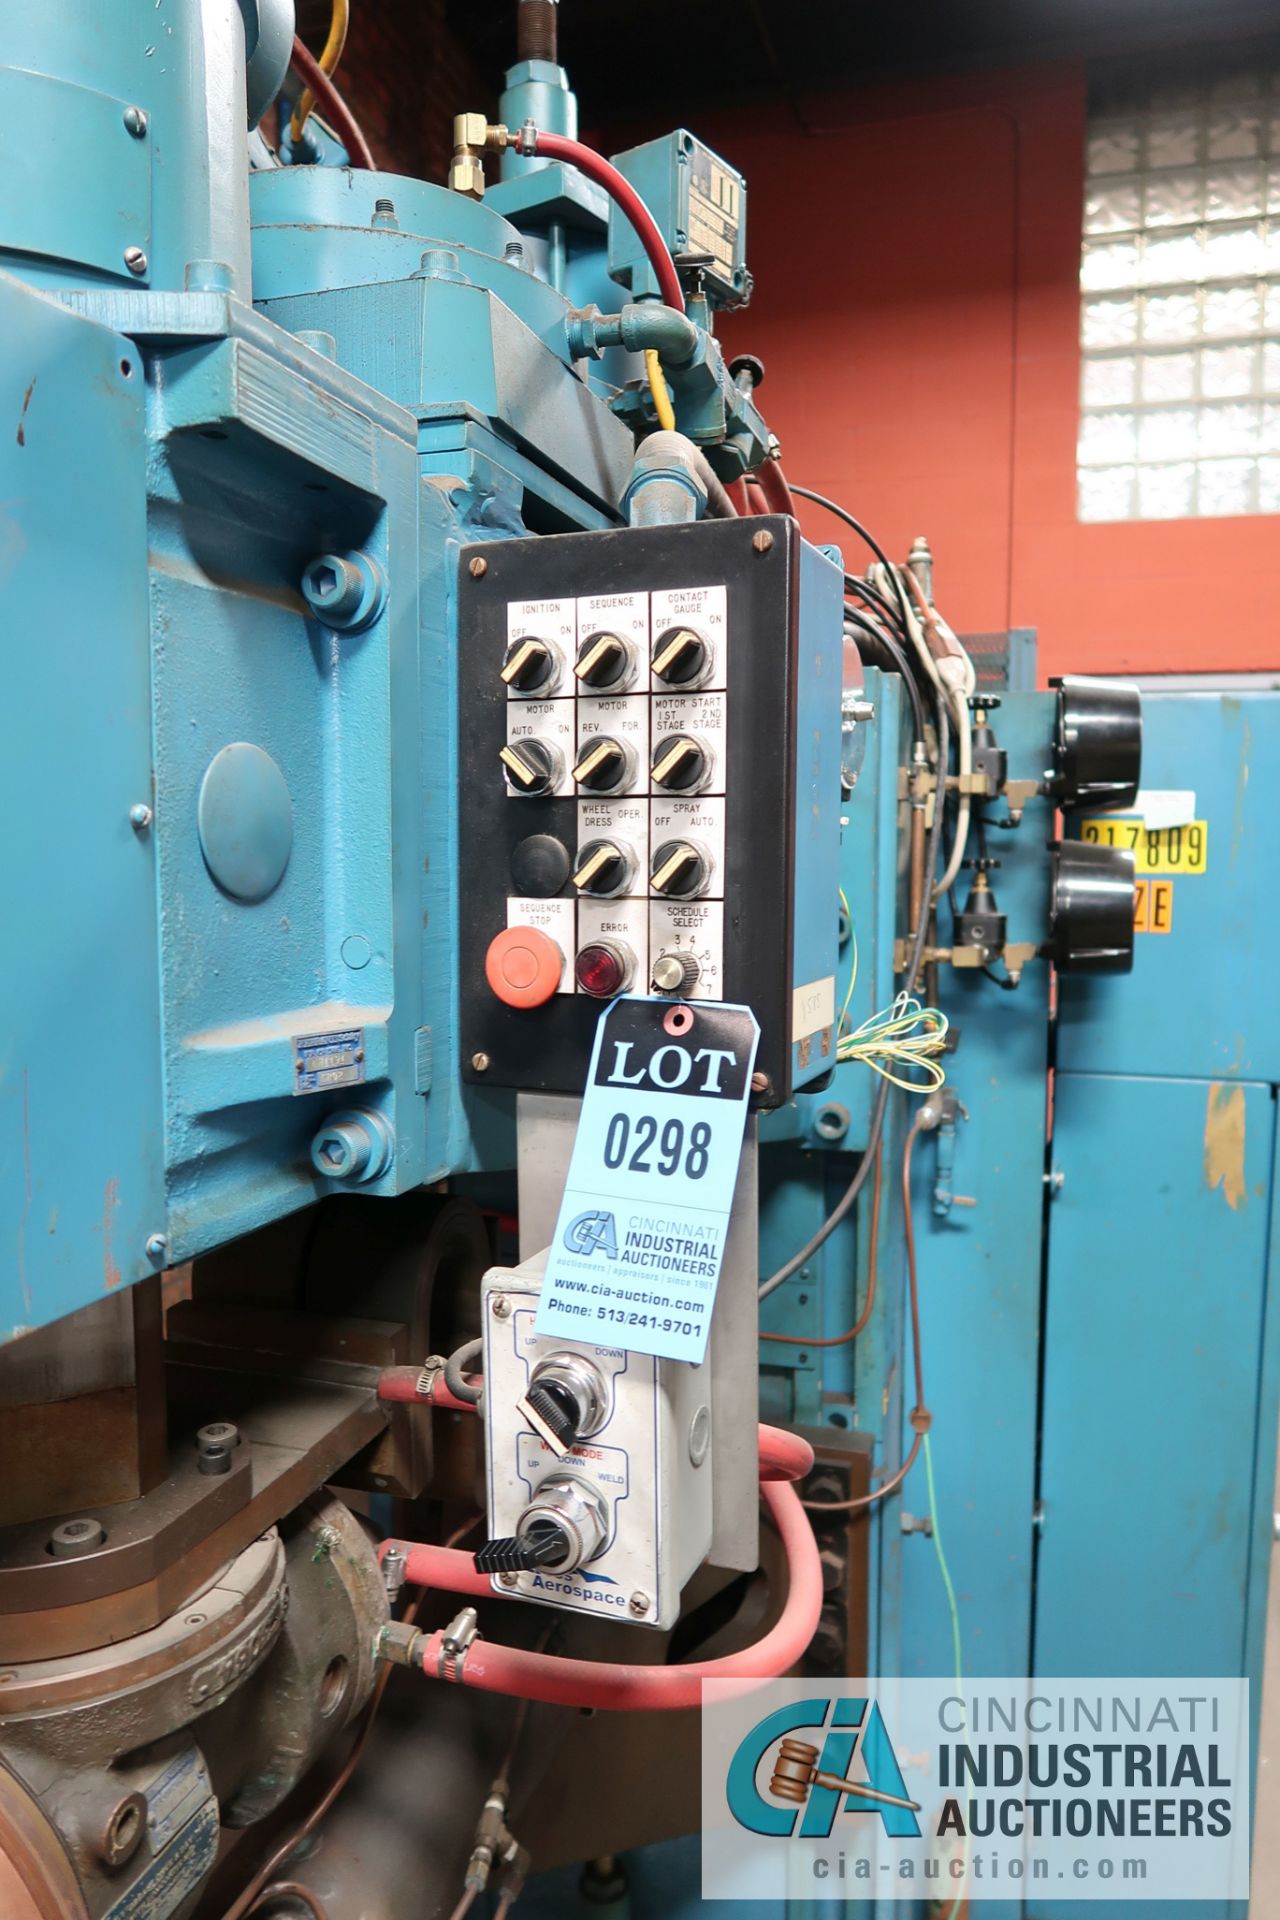 75 KVA FERRANTI-SCIAKY TYPE PMMITCMP SEAM WELDER; S/N 11487, 460 VOLTS, 60 HERTZ, SCIAKY TOUCH- - Image 7 of 12